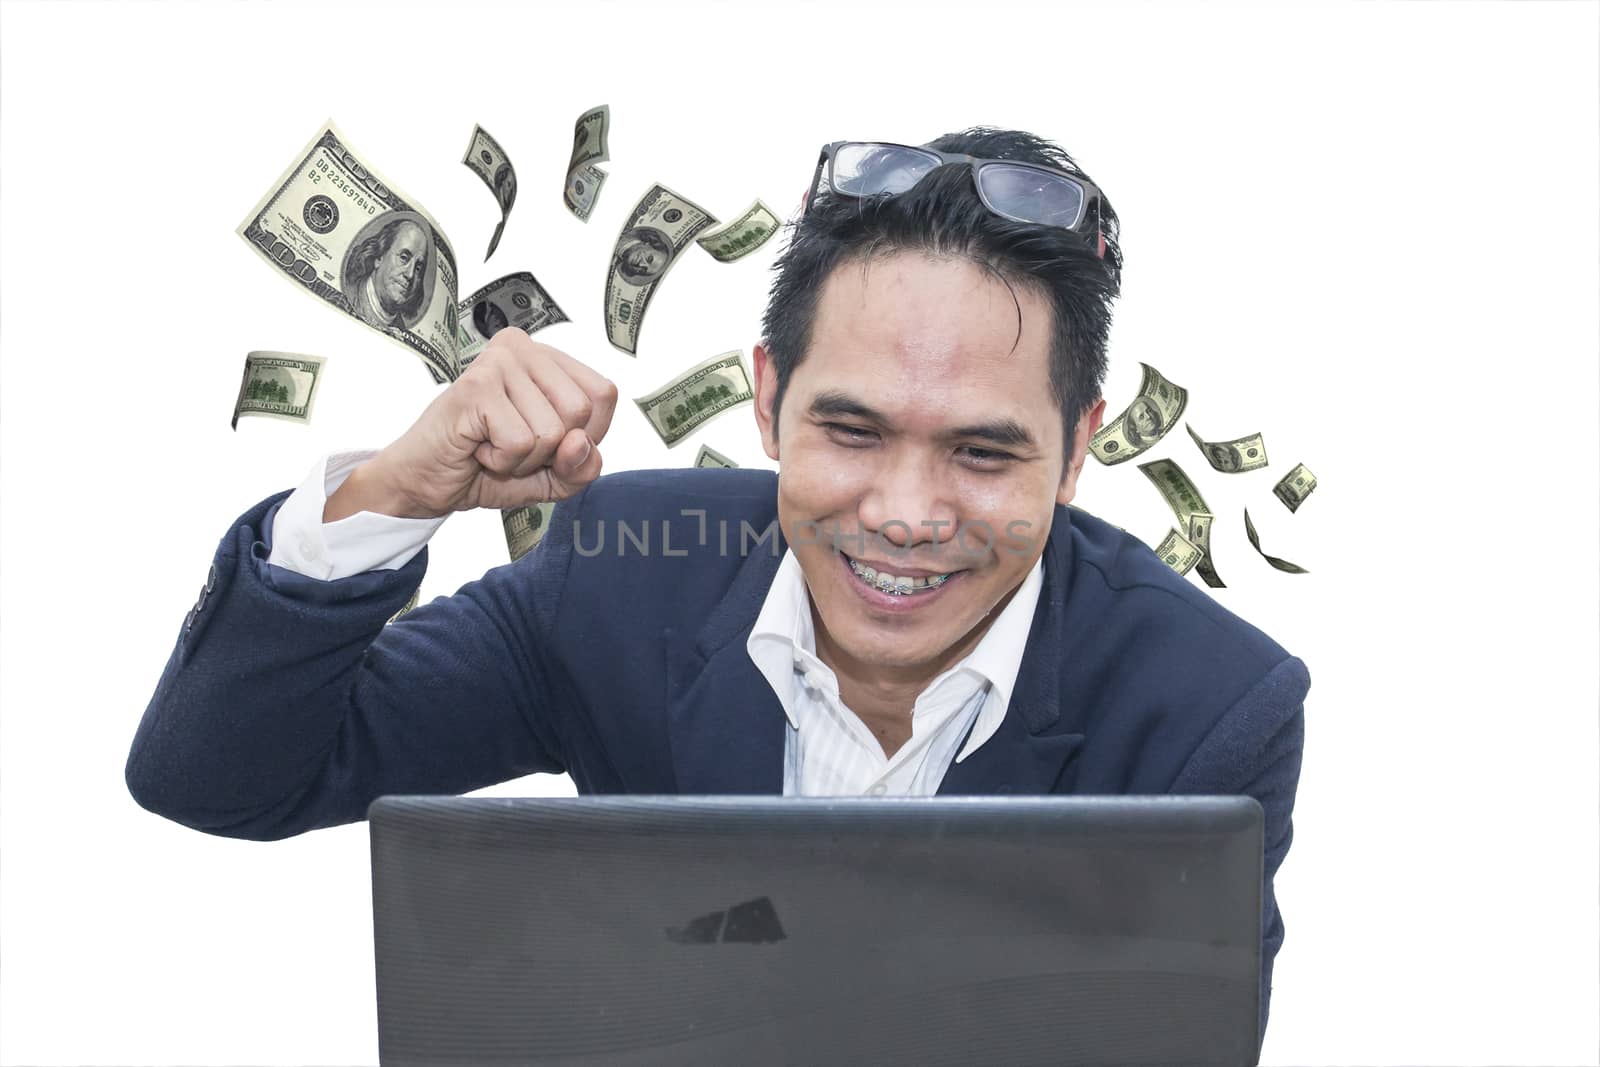  Asian businessman keeping arms raised and expressing positivity on white background,Celebrating success,dollars flying from behind